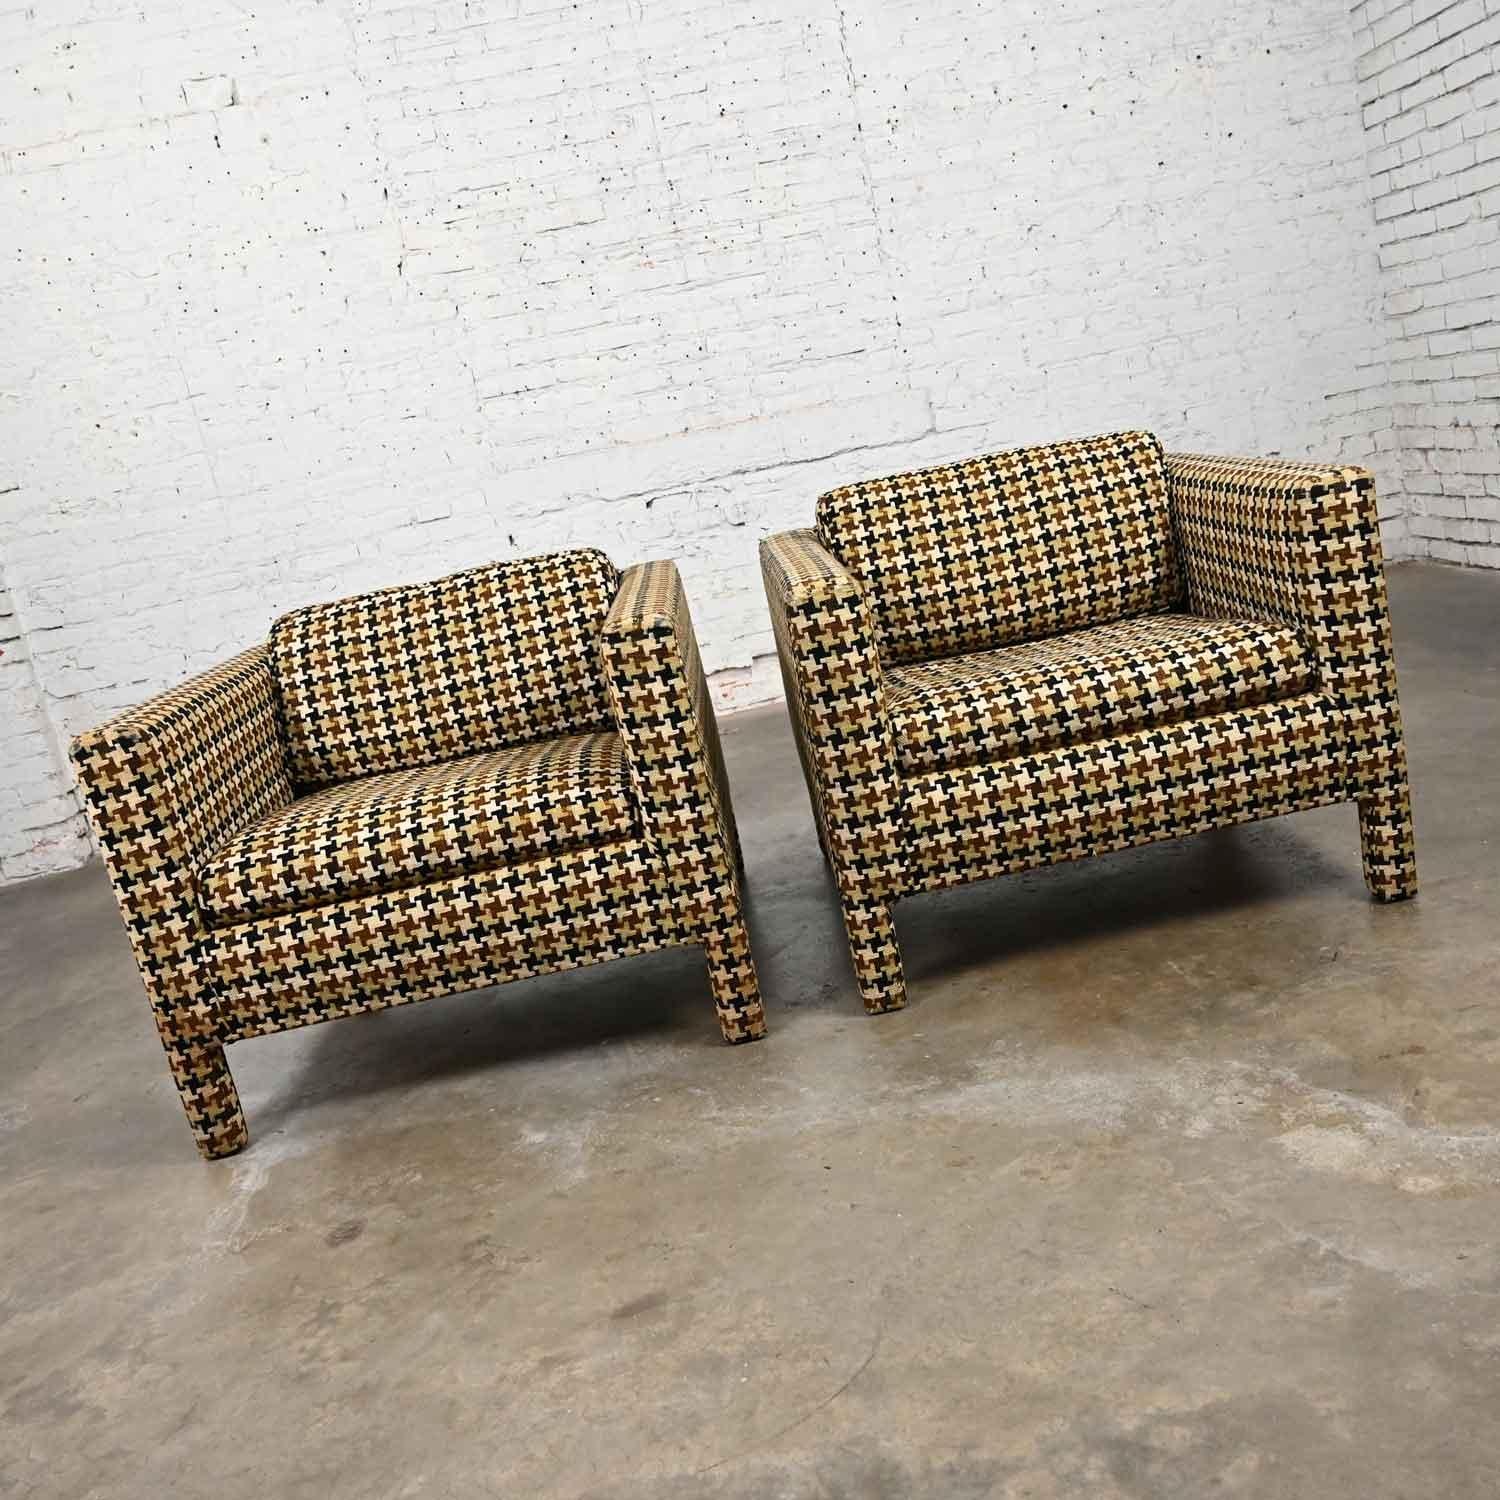 Handsome vintage mid-century modern to modern Parson’s style cube club chairs wearing houndstooth fabric a pair. Good condition, keeping in mind that these are vintage and not new so will have signs of use and wear. There are stains and wear on the